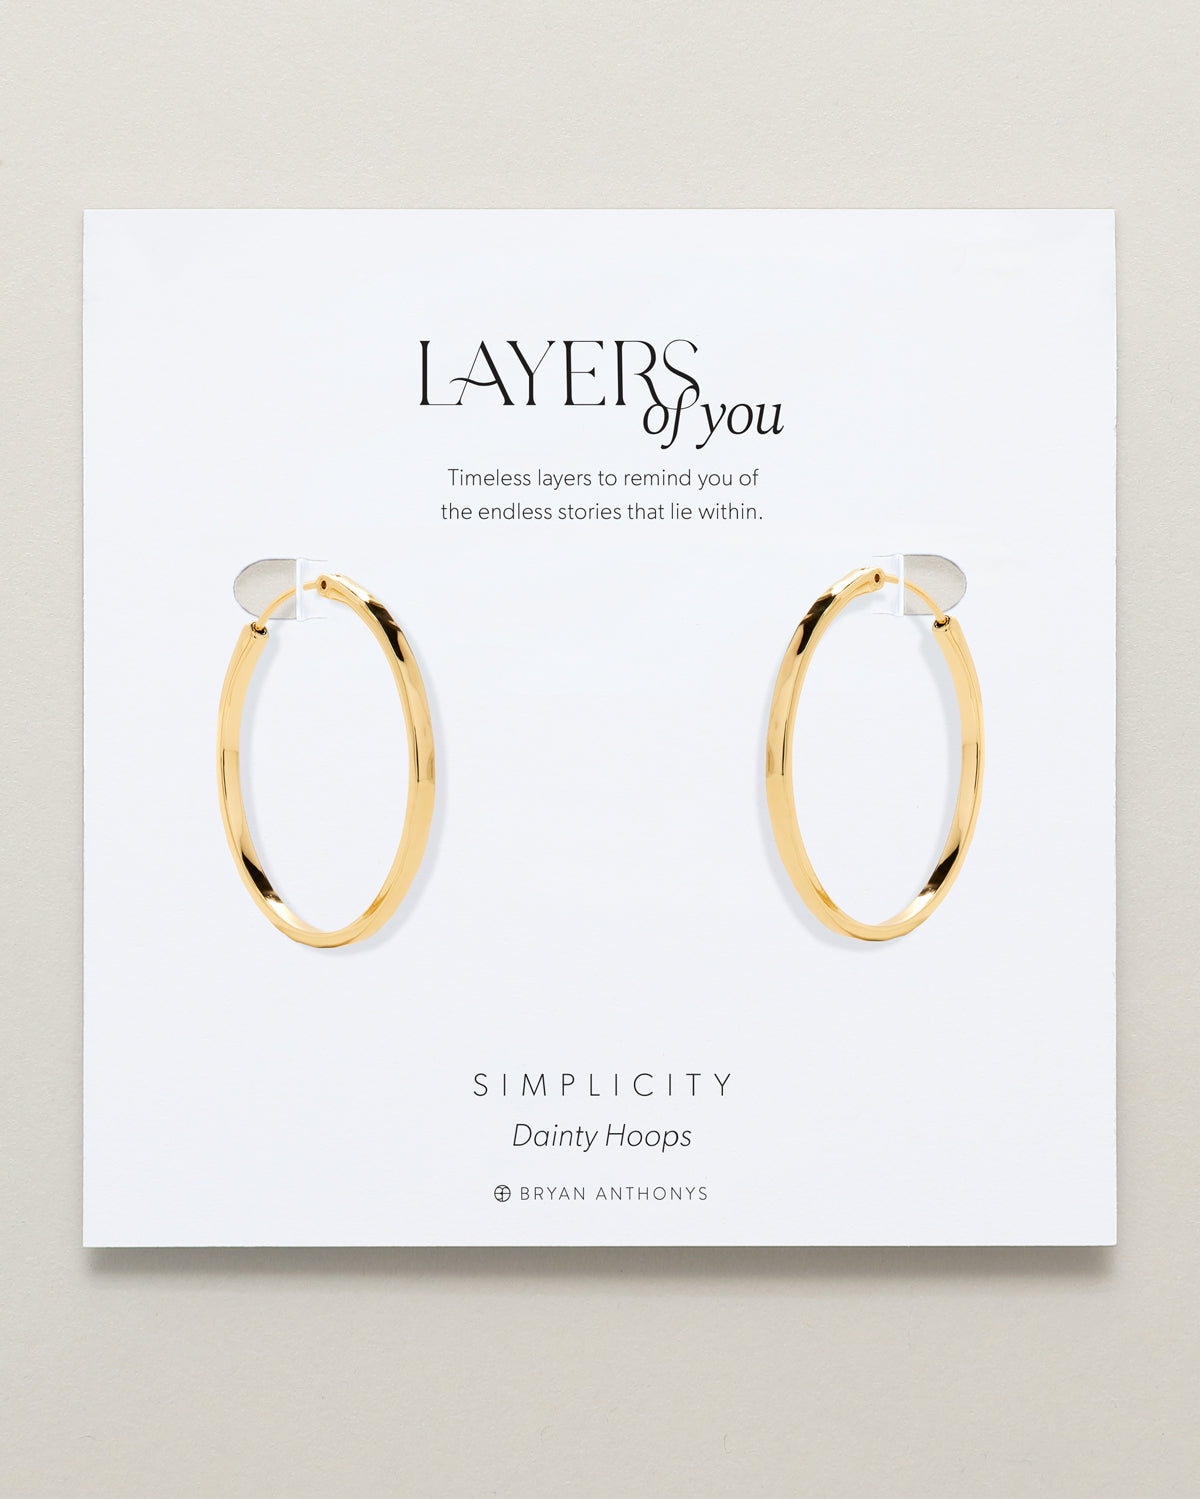 Bryan Anthonys Layers of You Simplicity Gold Hoop Earrings On Card